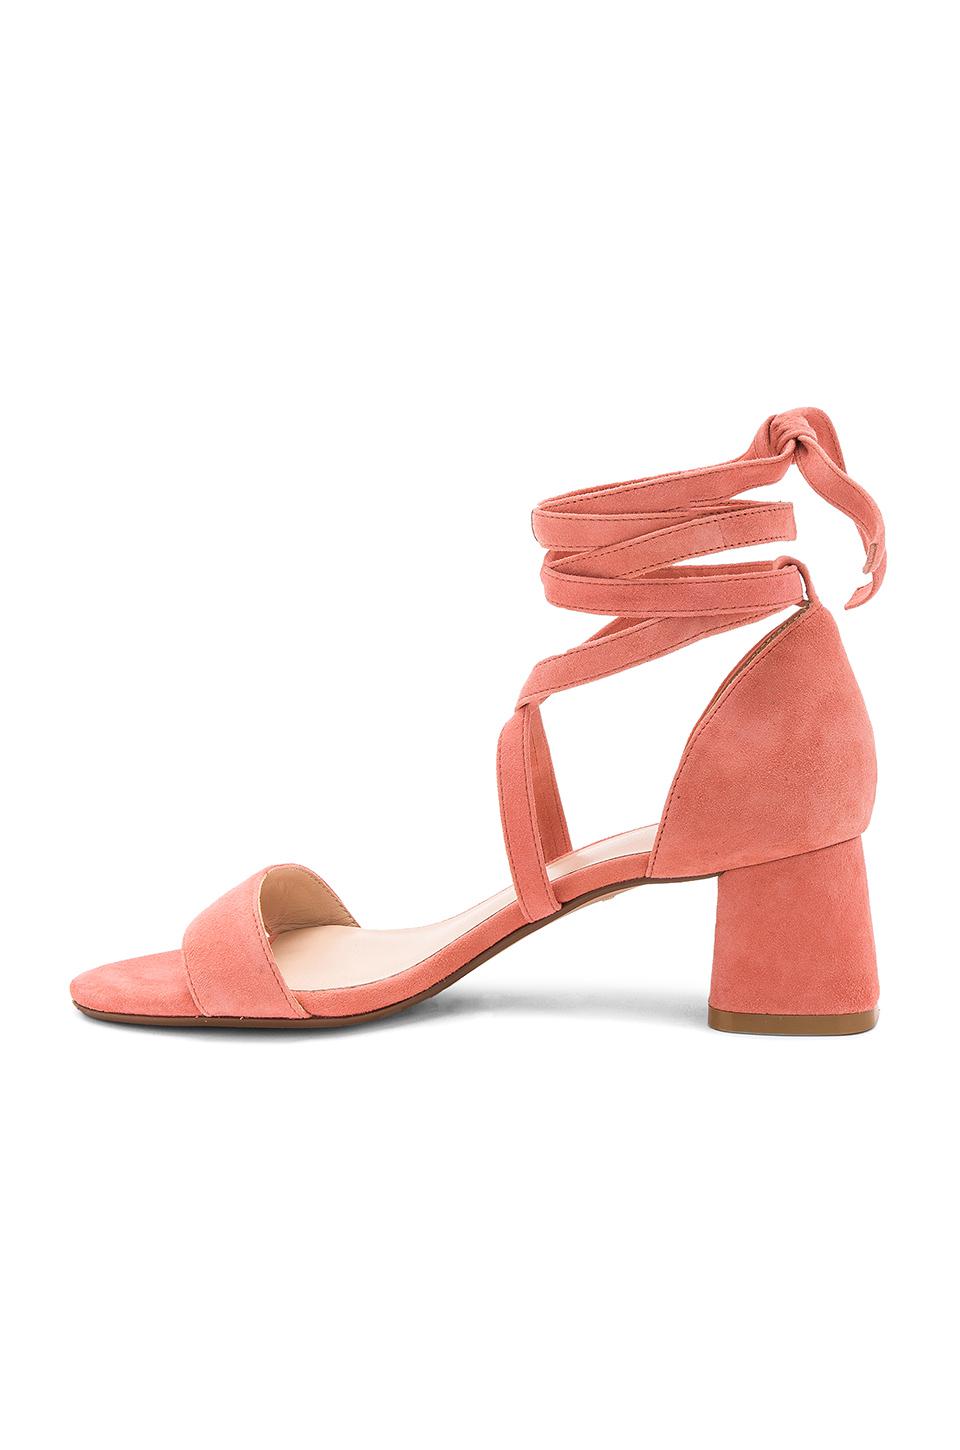 RAYE Suede Angie Heel in Peach (Pink) - Lyst